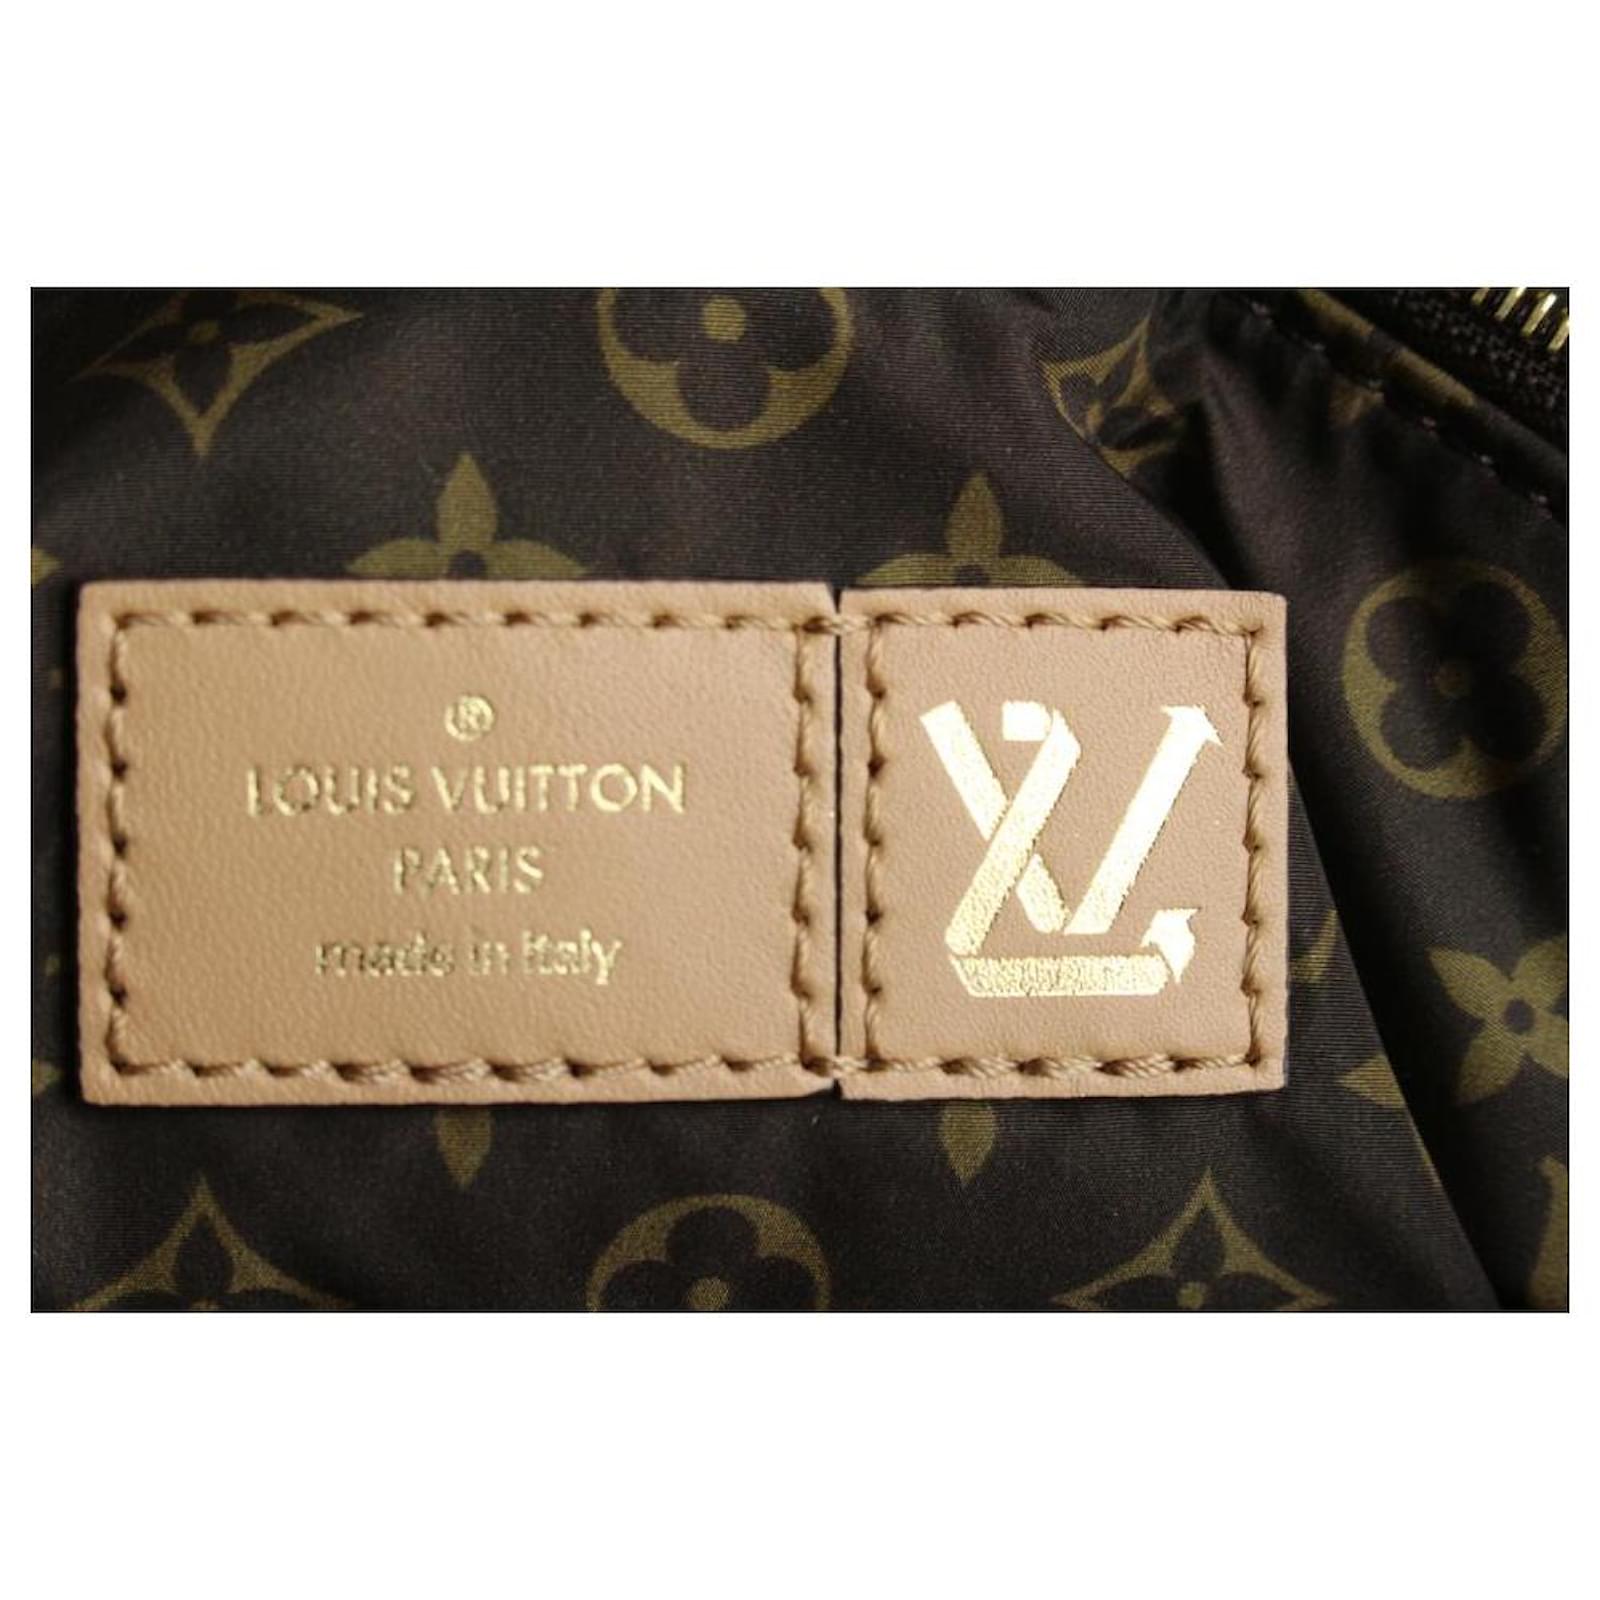 Louis Vuitton Beige Puffer Quilted Pillow Onthego GM 2way Tote Bag